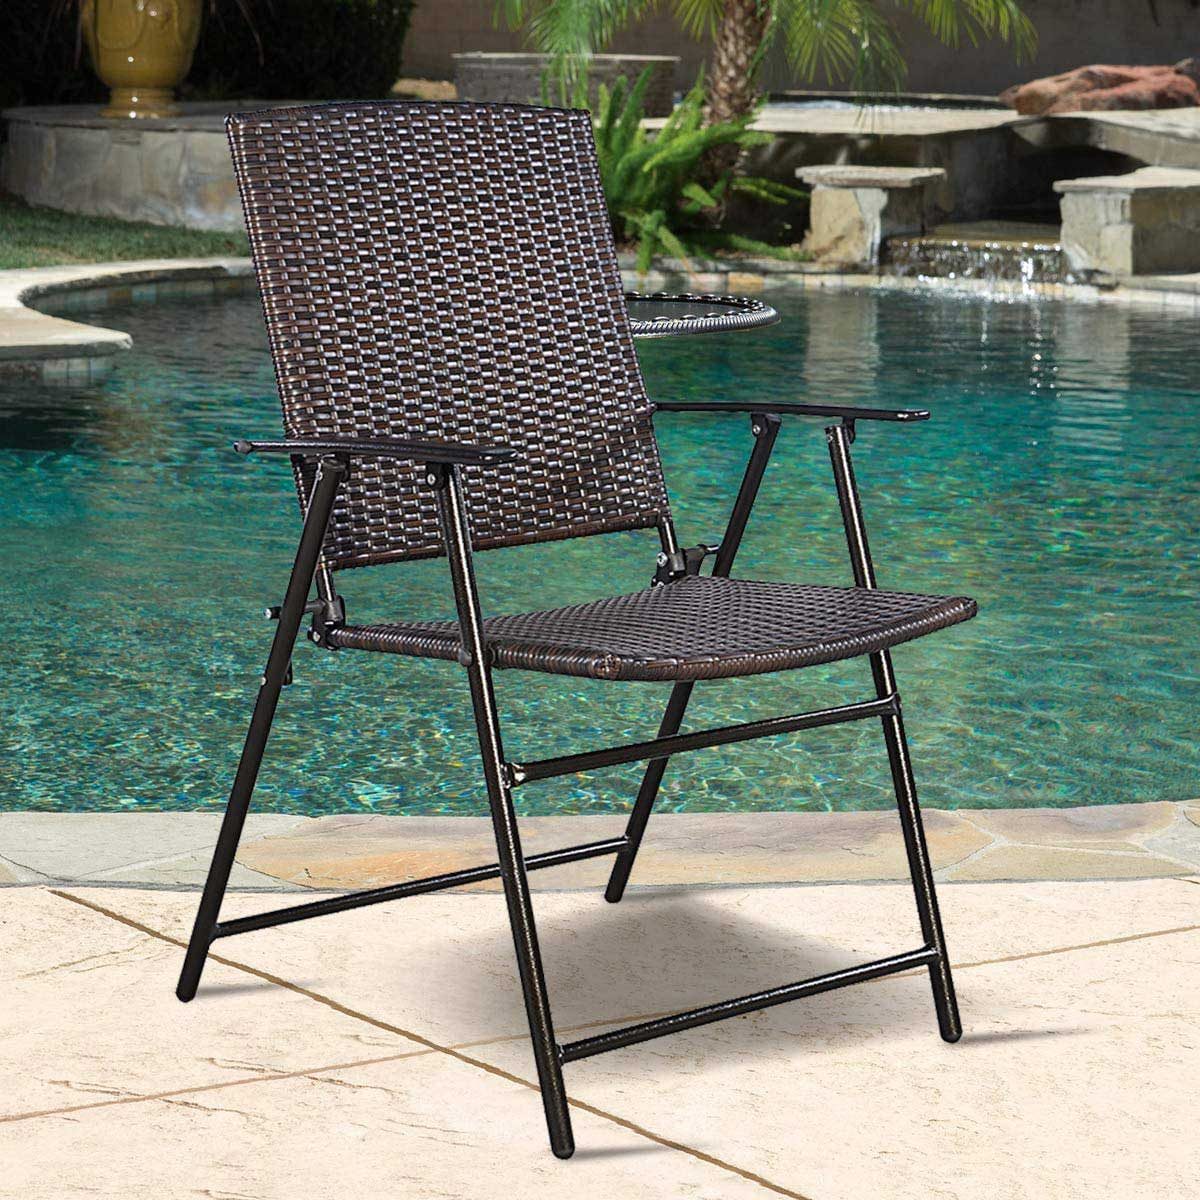 The Best Outdoor Folding Chairs for 2022 | The Family Handyman